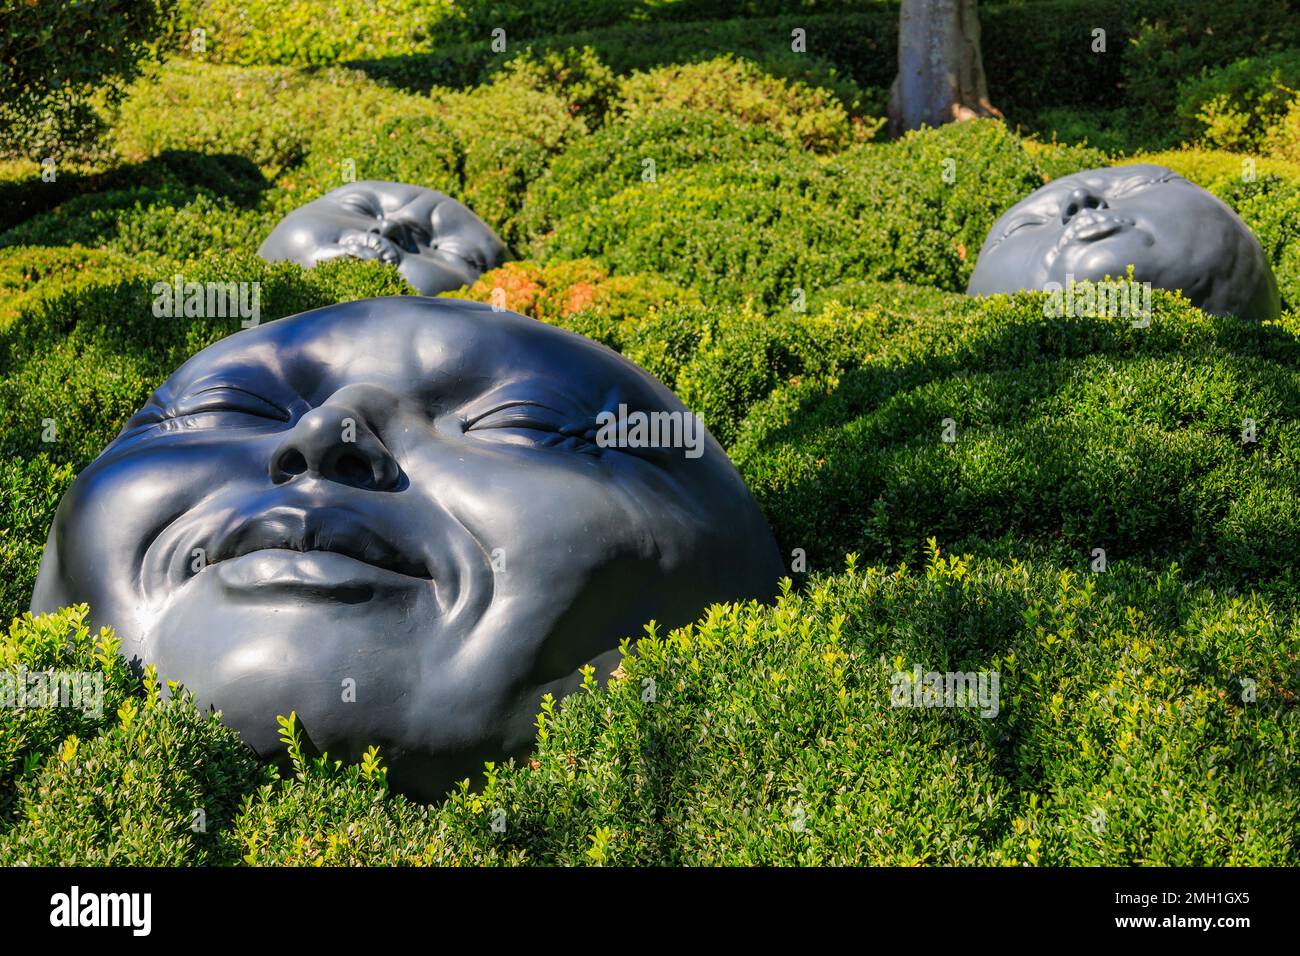 Normandy, France. The Raindrops installation from the collection of modern art in the Garden of Emotions of the Etretat Gardens. Stock Photo